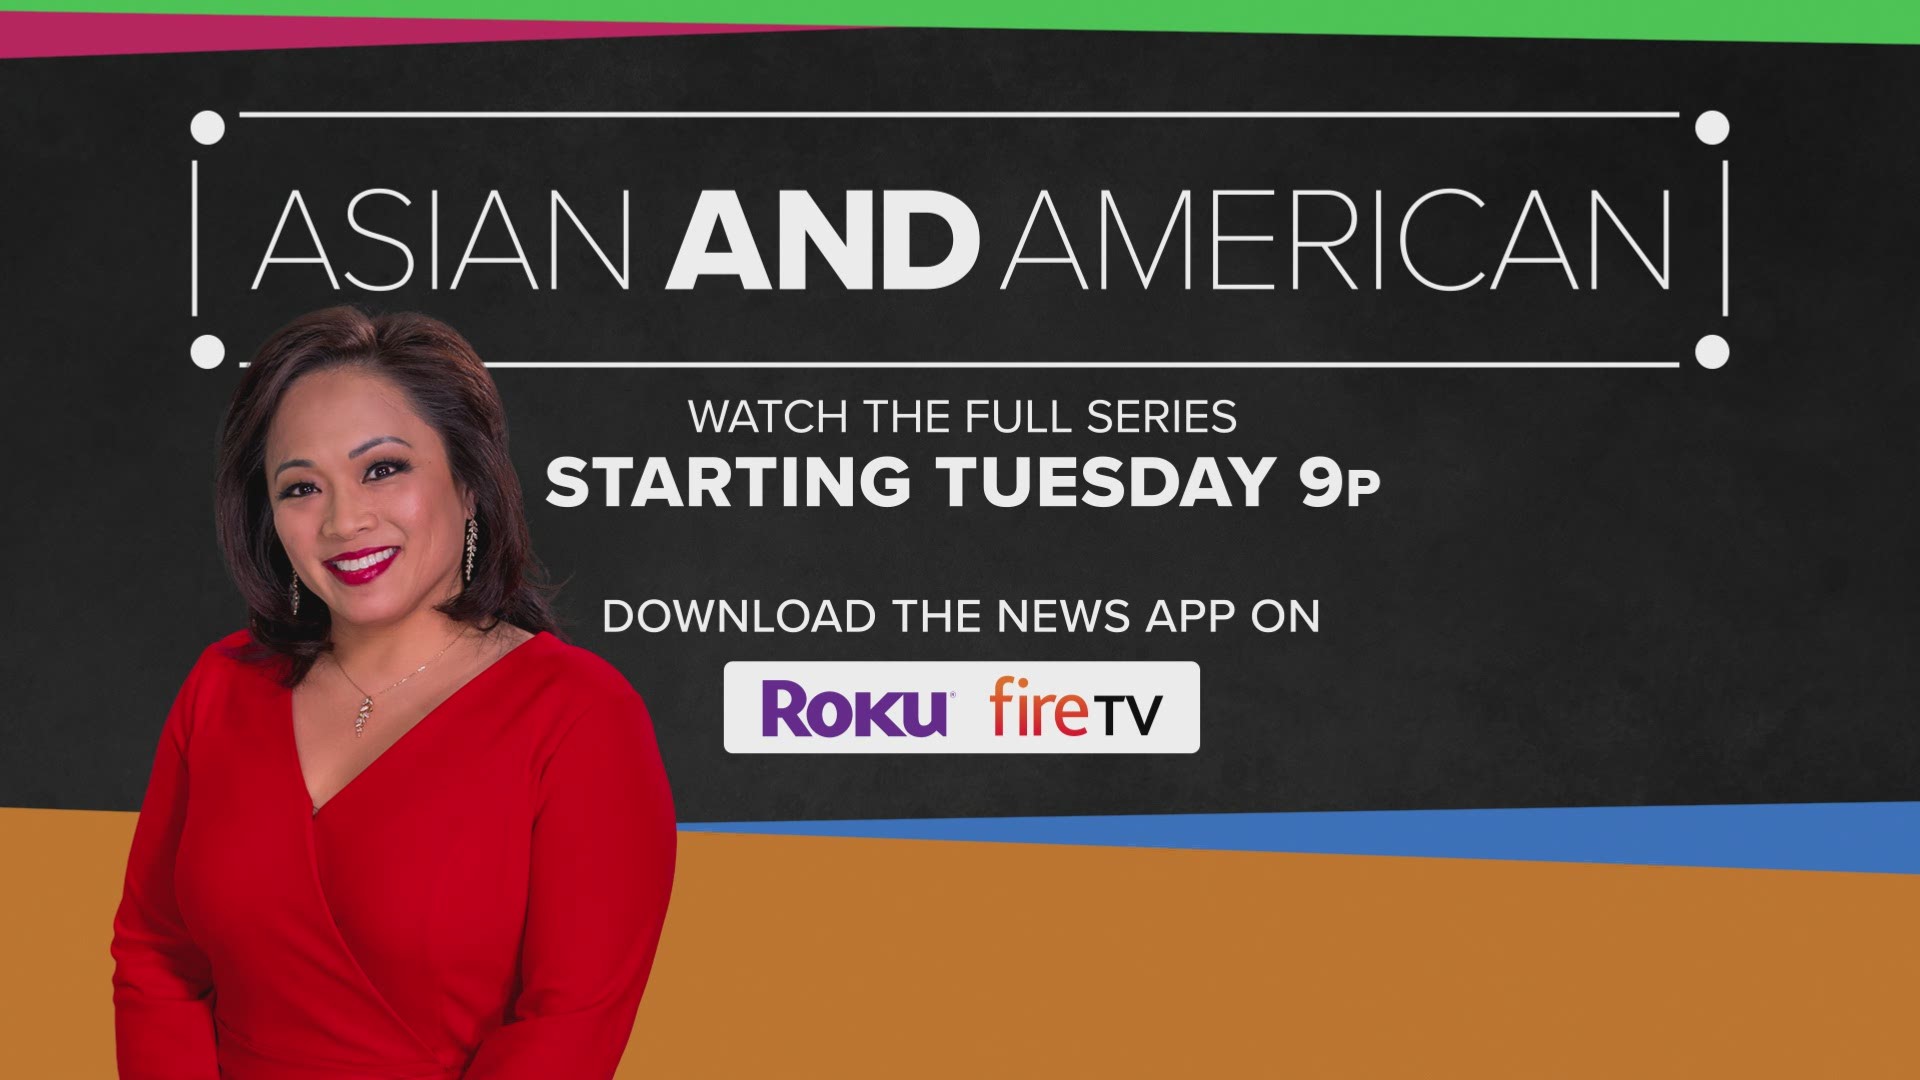 "Asian and American" premieres at 9 p.m. Tuesday on the 10TV Roku and Amazon Fire TV apps.